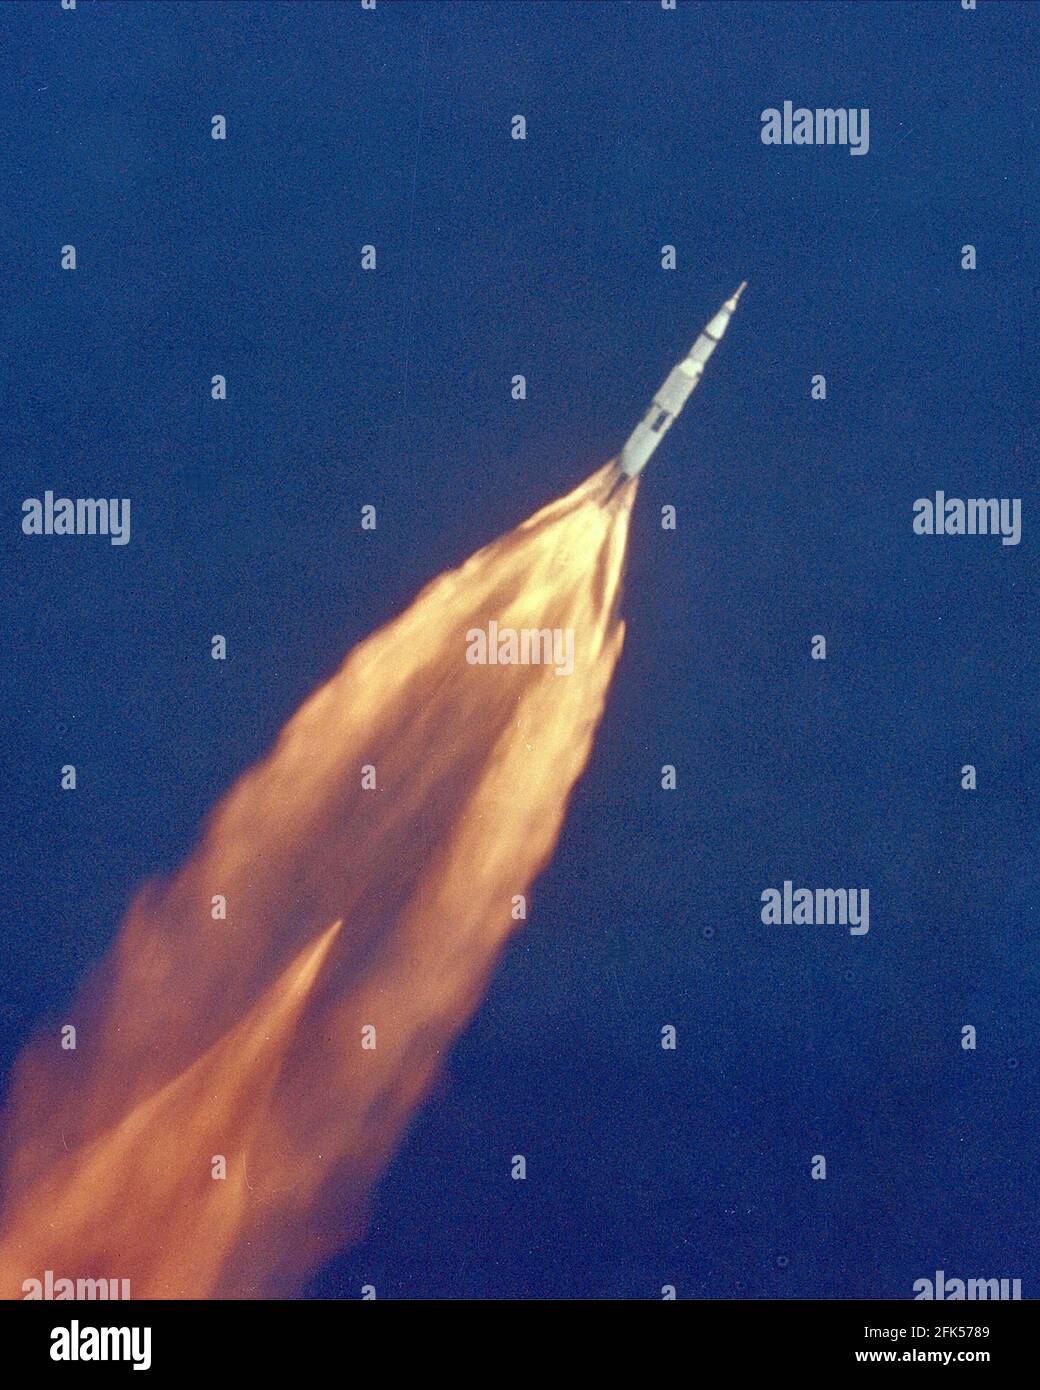 Cape Canaveral, FL - (FILE) -- The Apollo 11 Saturn V space vehicle climbs toward orbit after liftoff from Pad 39A at 9:32 a.m. EDT on Wednesday, July 16, 1969. In 2 1/2 minutes of powered flight, the S-IC booster lifts the vehicle to an altitude of about 39 miles some 55 miles downrange. This photo was taken with a 70mm telescopic camera mounted in an Air Force EC-135N plane. Onboard are astronauts Neil A. Armstrong, Michael Collins and Edwin E. Aldrin, Jr.Credit: NASA via CNP. | usage worldwide Stock Photo